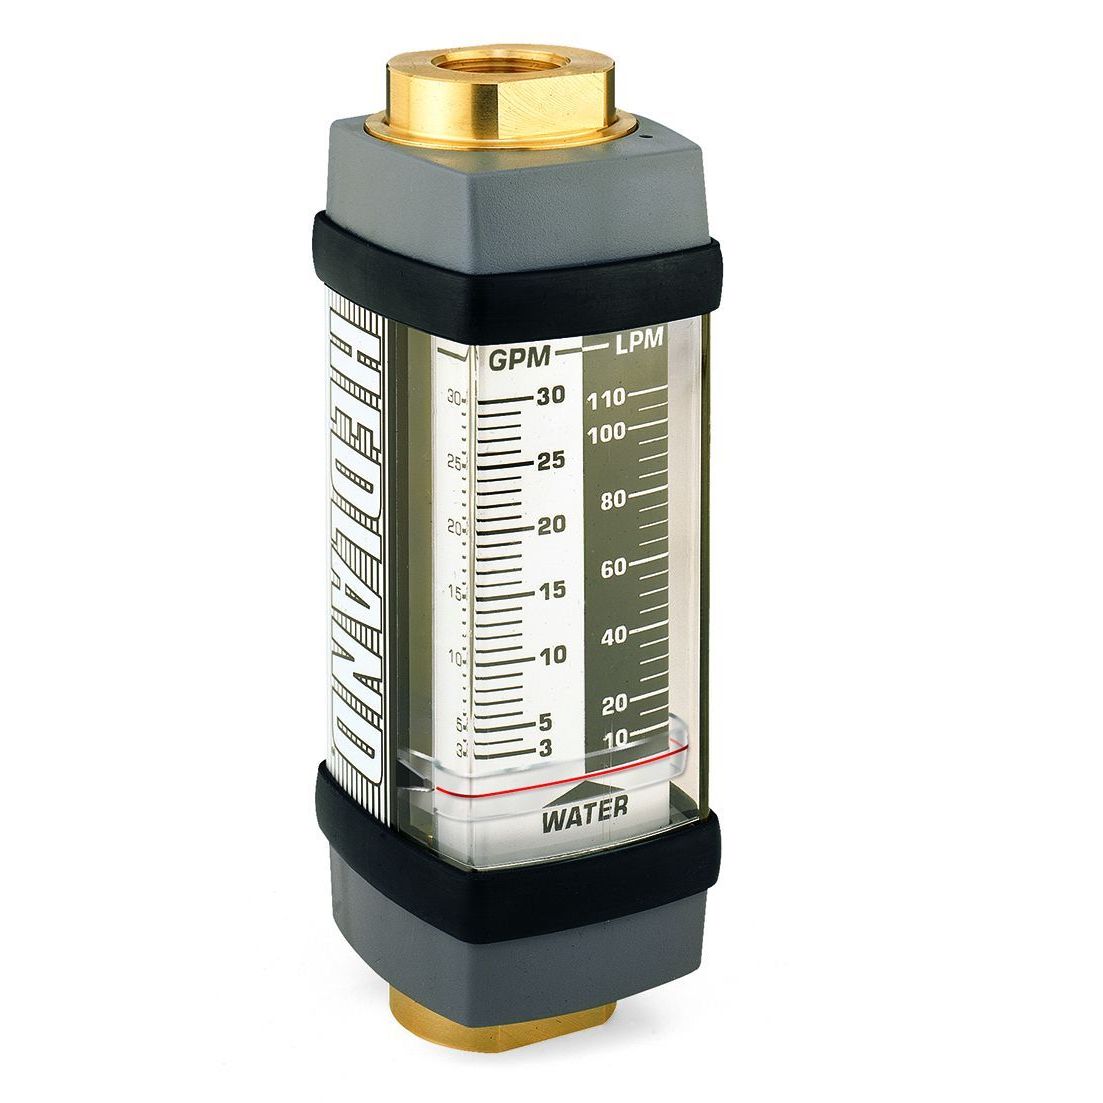 H705B-002 : Hedland 3500psi Brass Flow Meter for Water, 3/4 NPT, 0.2 to 2.0 GPM